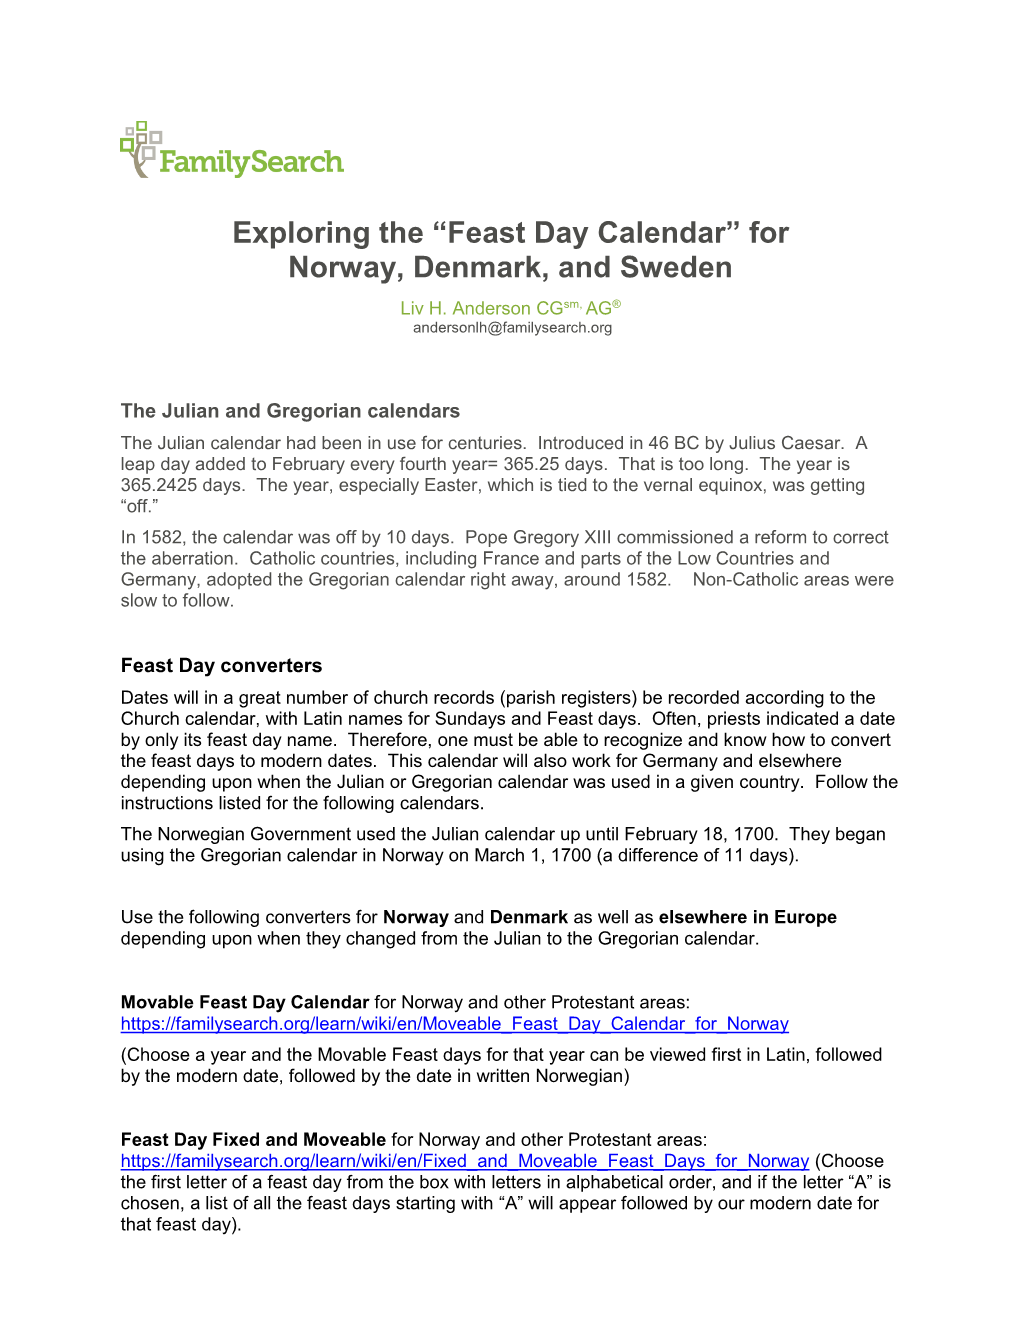 Exploring the “Feast Day Calendar” for Norway, Denmark, and Sweden Liv H